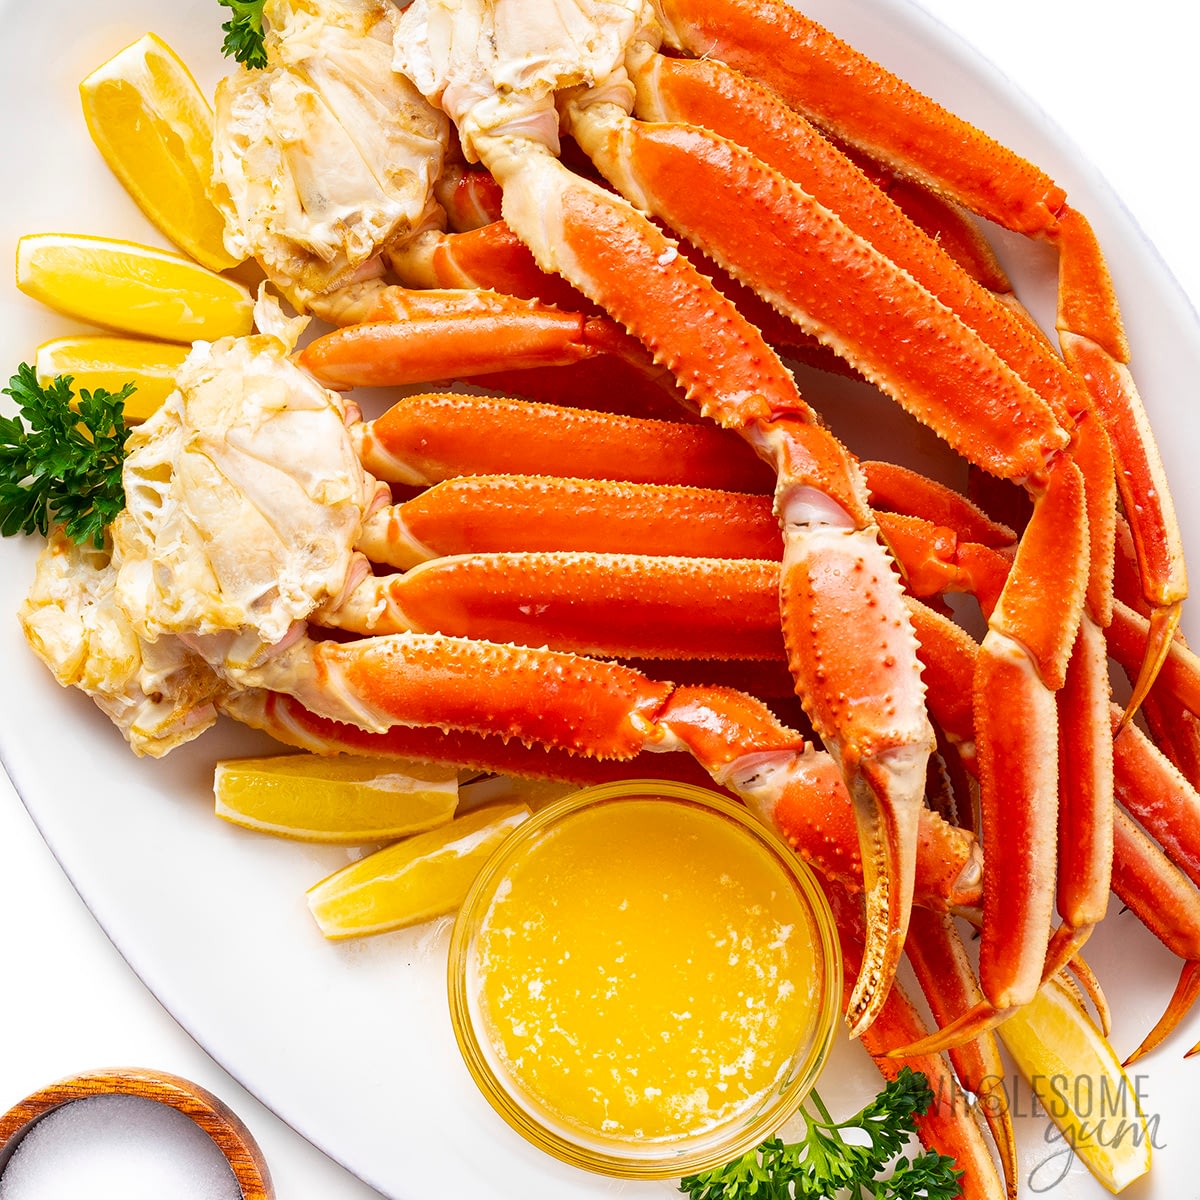 This recipe shows how to cook crab legs perfectly, like the ones in this photo.